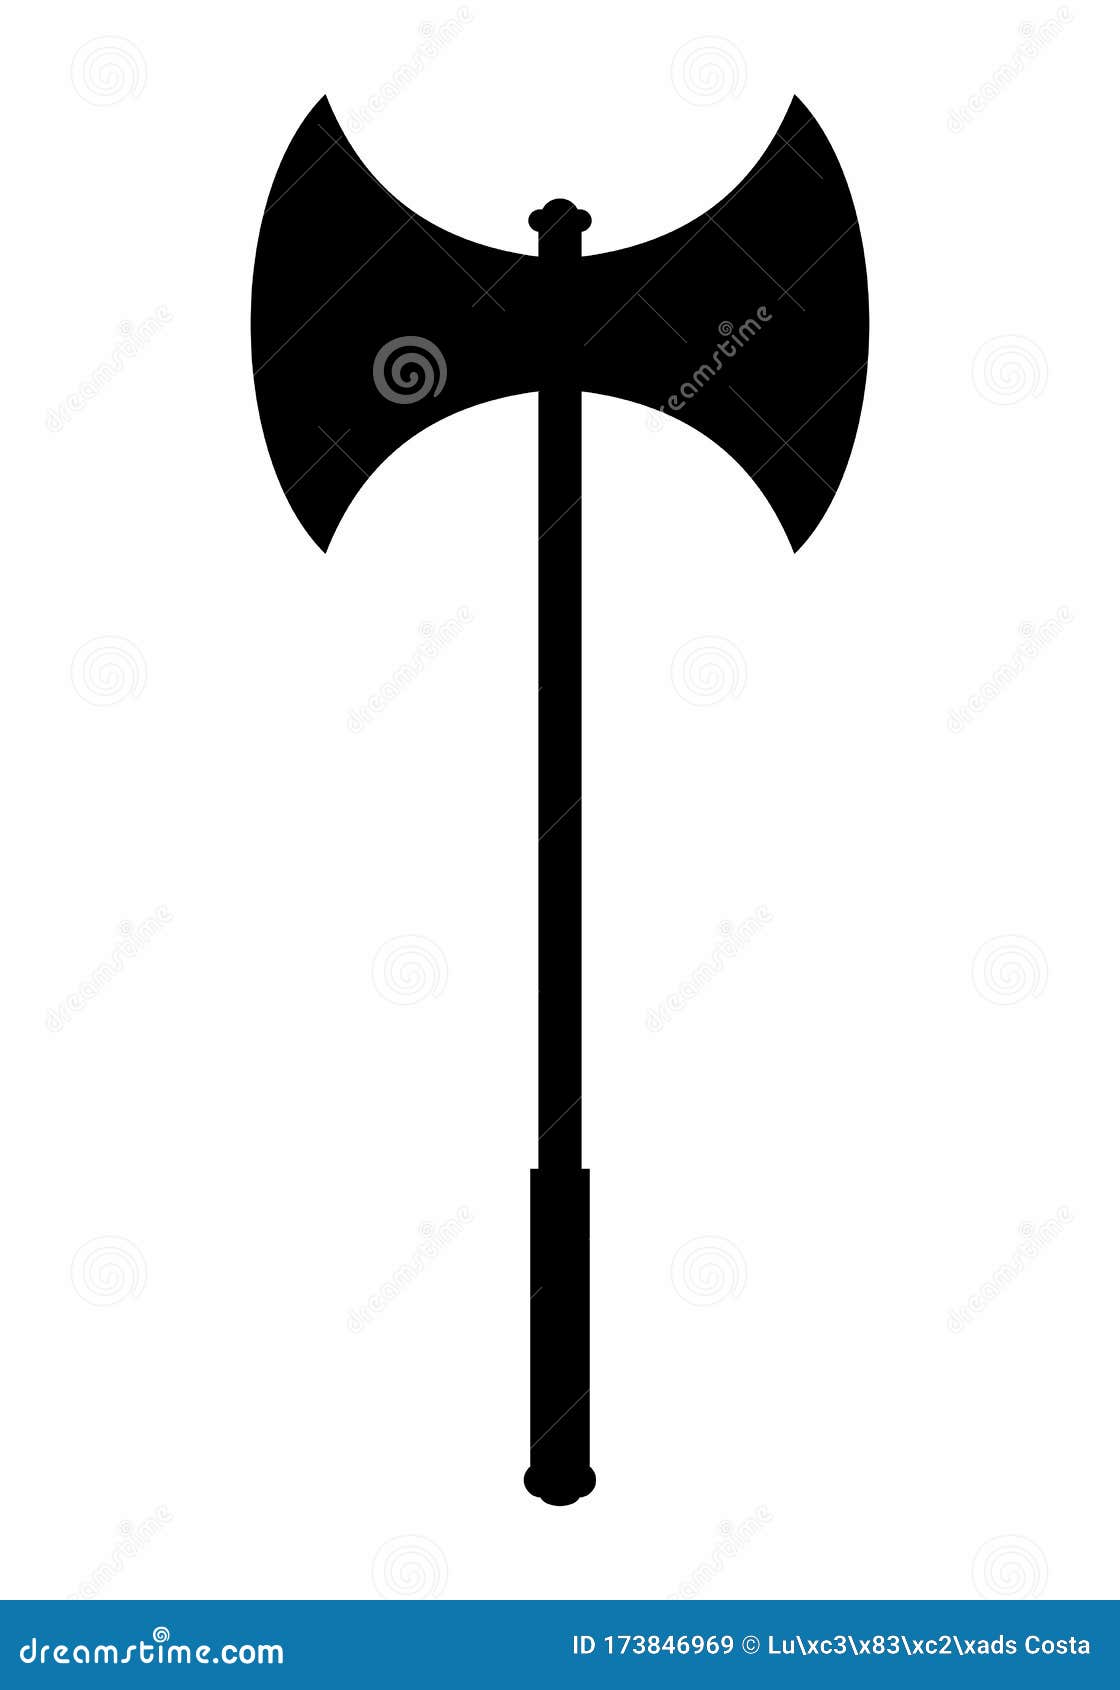 Double Sided Axe Stock Illustrations 52 Double Sided Axe Stock Illustrations Vectors Clipart Dreamstime